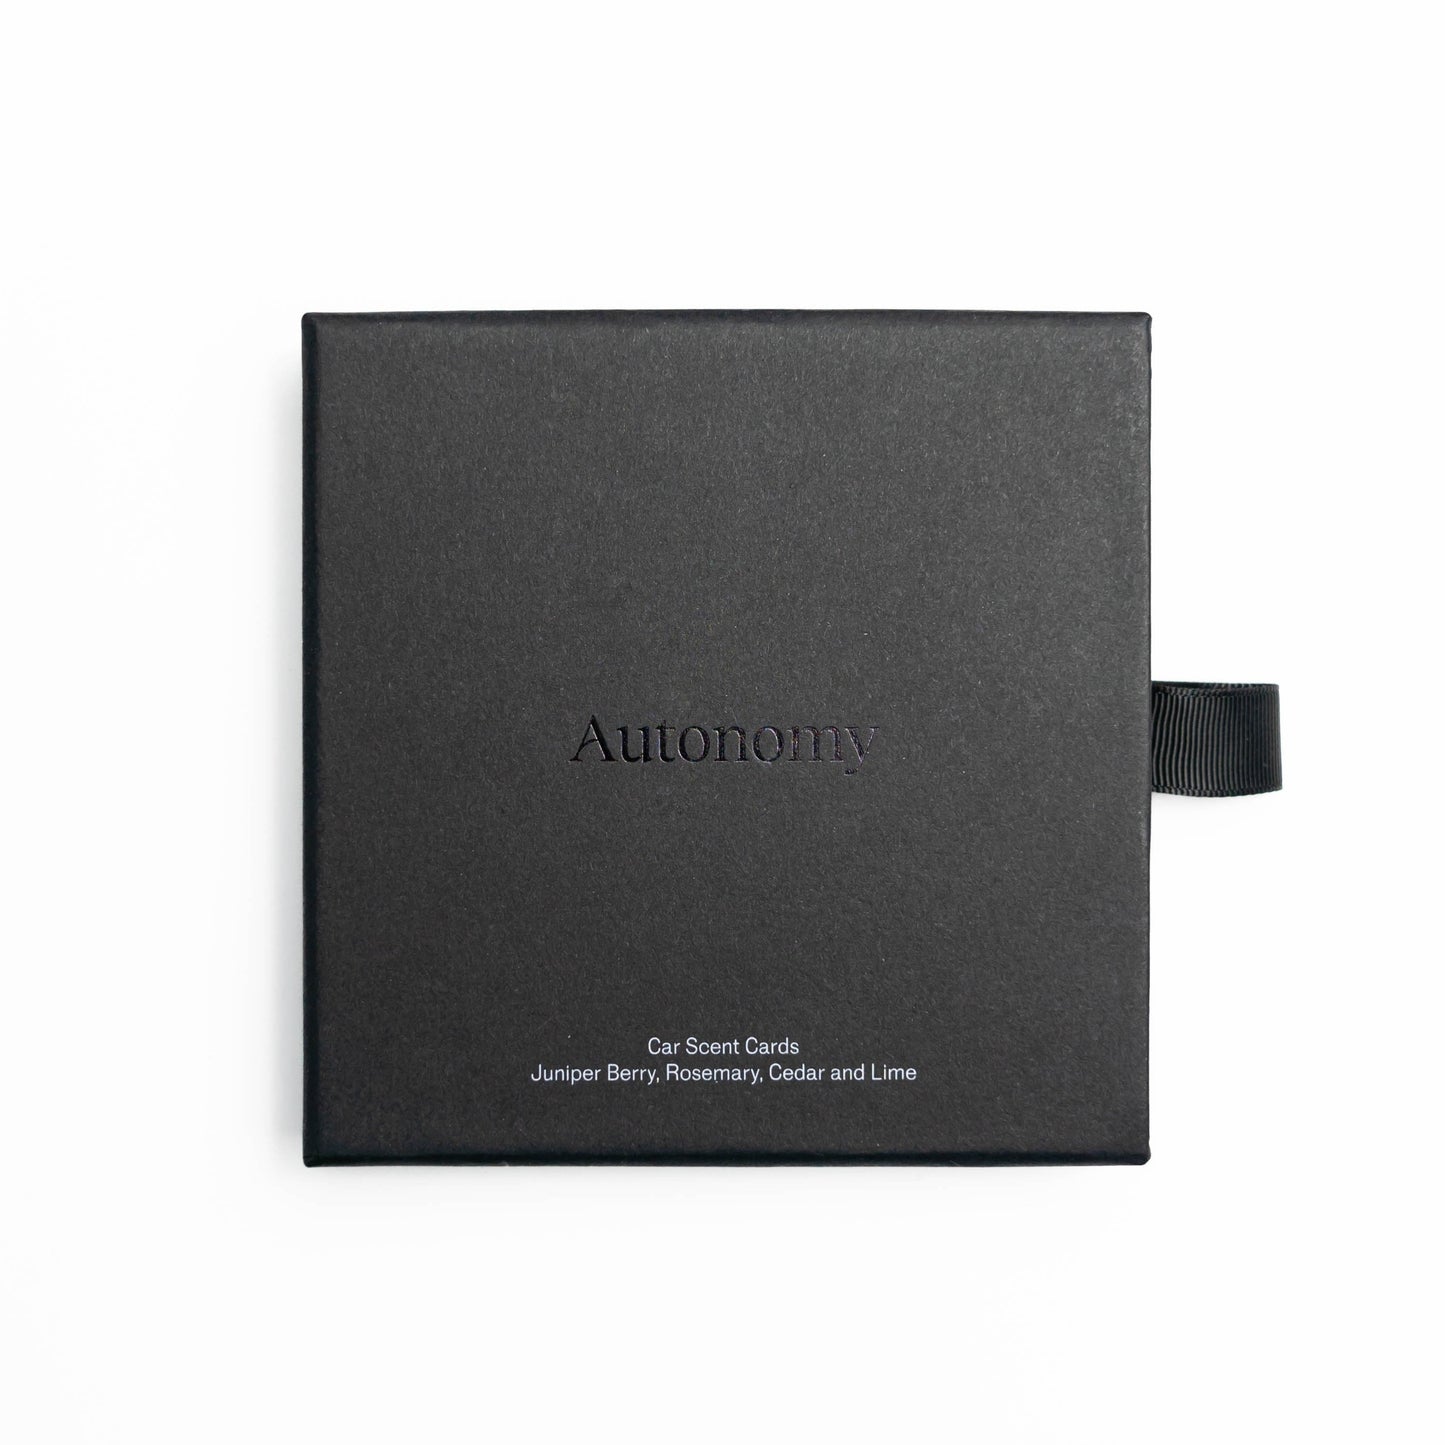 box of the autonomy car scent cards pictured on a white background